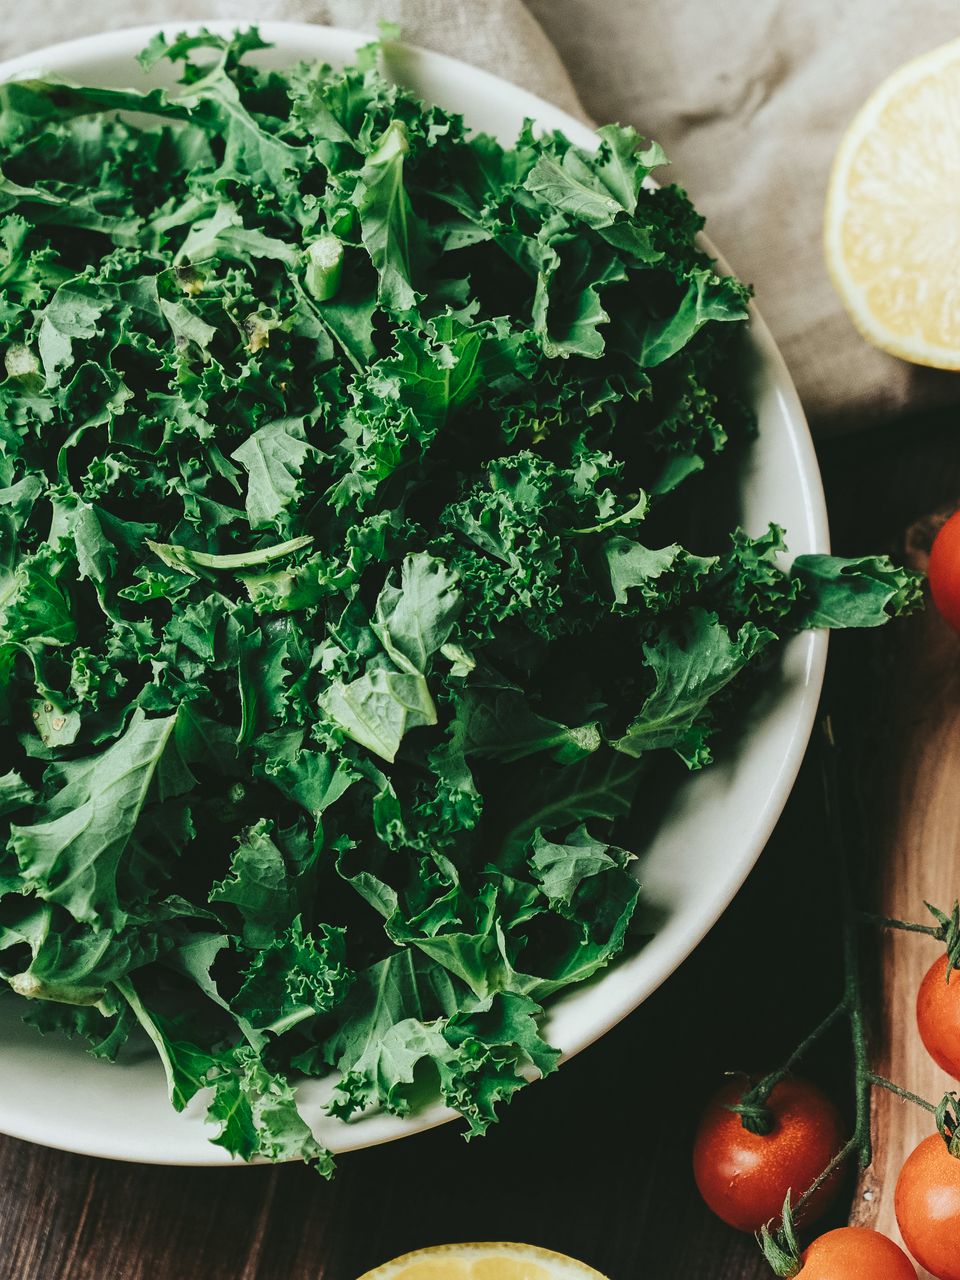 Should You Cook Kale or Eat It Raw?